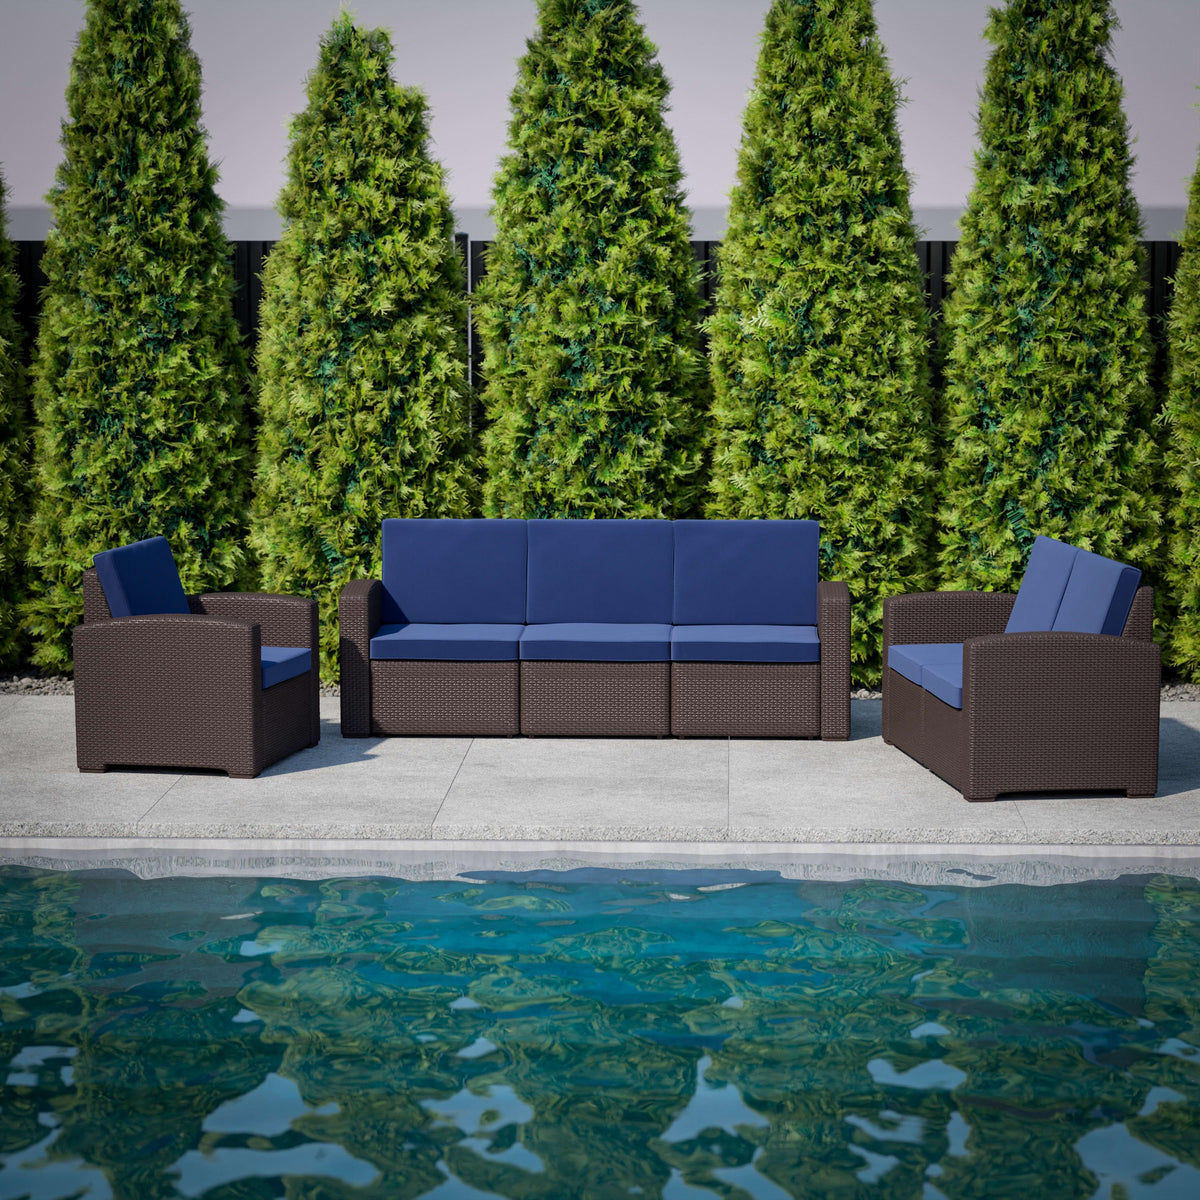 Brown/Navy |#| Chocolate Brown Faux Rattan Loveseat with All-Weather Navy Cushions